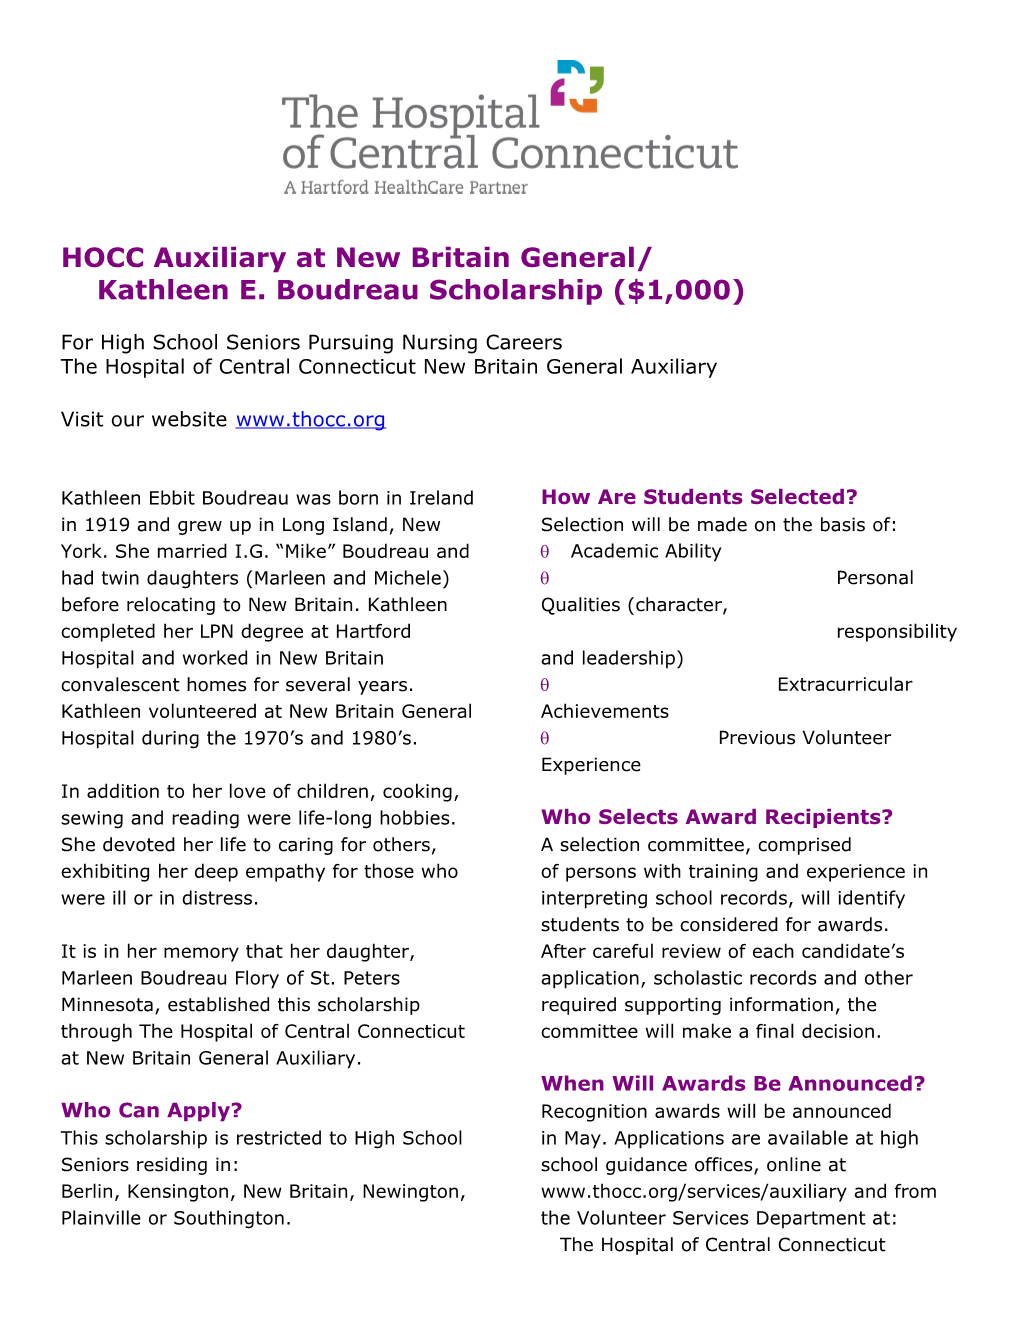 HOCC Auxiliary at New Britain General/Kathleen E. Boudreau Scholarship($1,000)